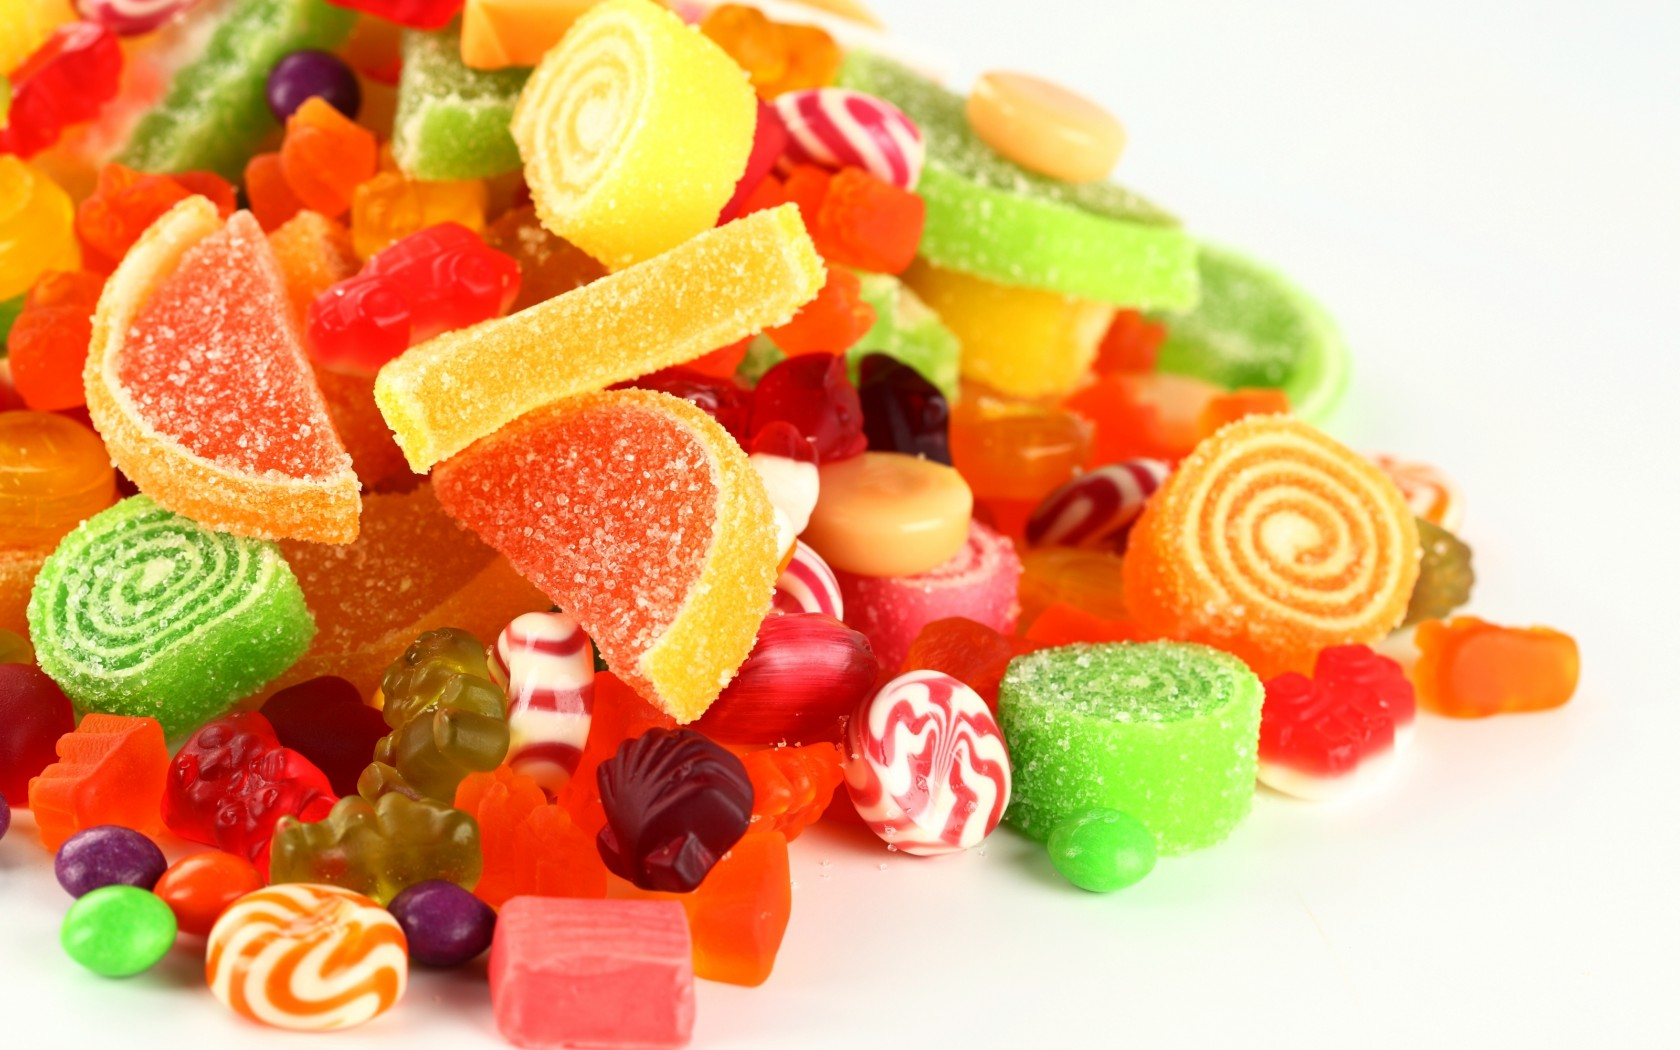 Candy Image Sweeties HD Wallpaper And Background Photos